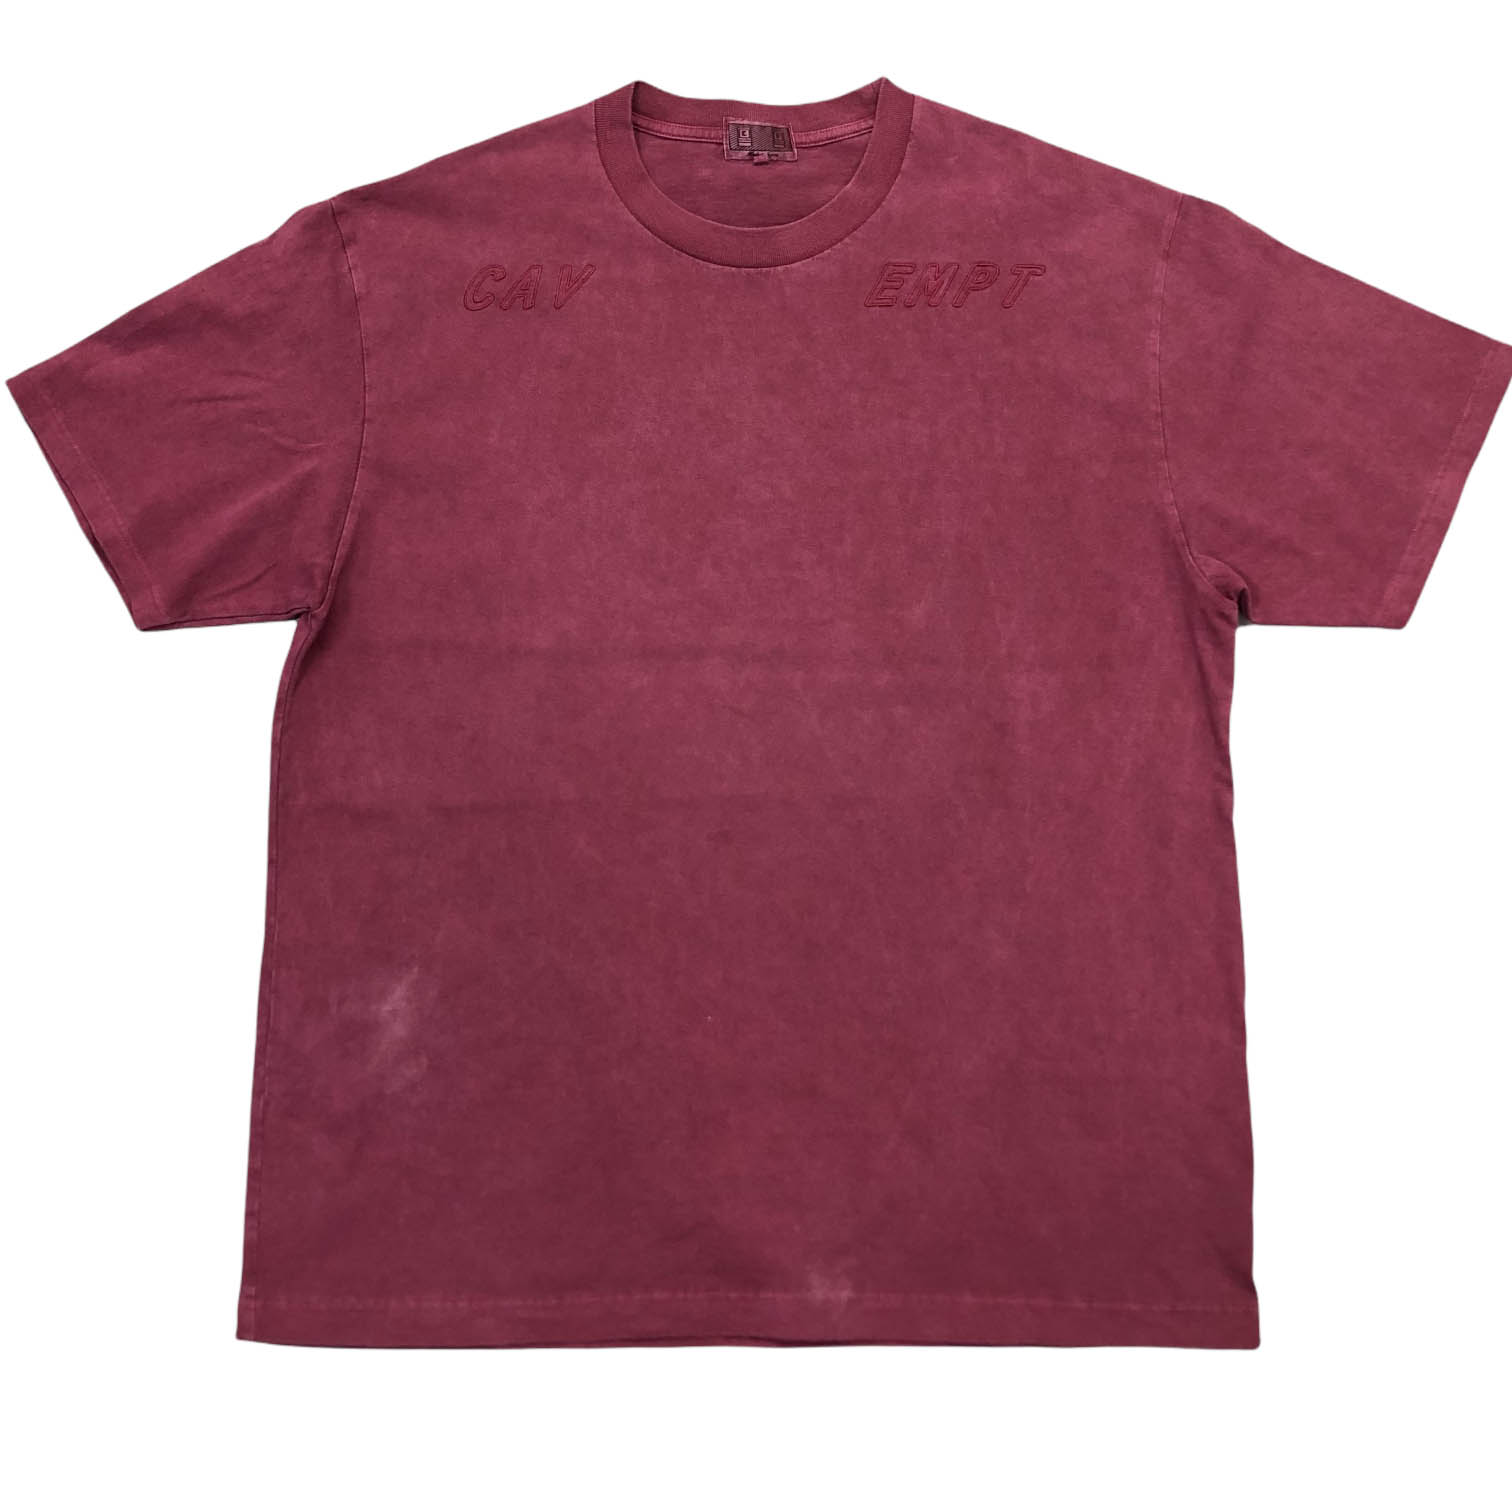 [Cav Empt] Embroidered Garments Dying Short Sleeve-Size XXL